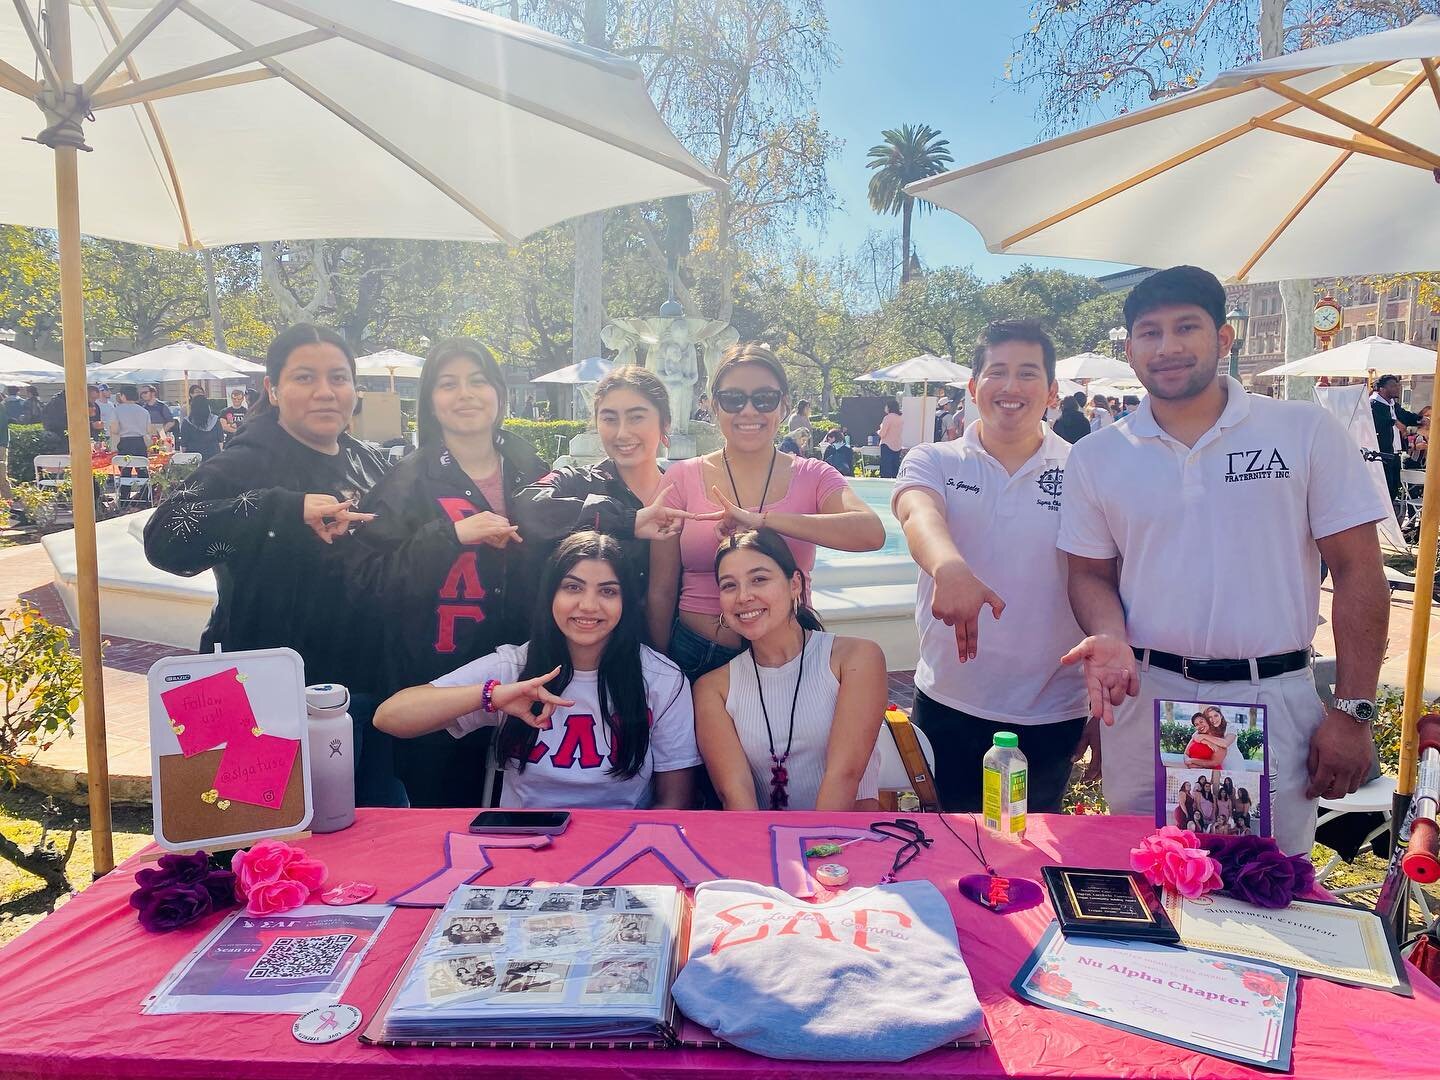 Day 2 of the Involvement Fair was a success! Shout out to our Gamma orgs🤍BUT ITS STILL NOT OVER! CHECK OUT OUR ORGS WHO ARE TABLING TODAY🤩